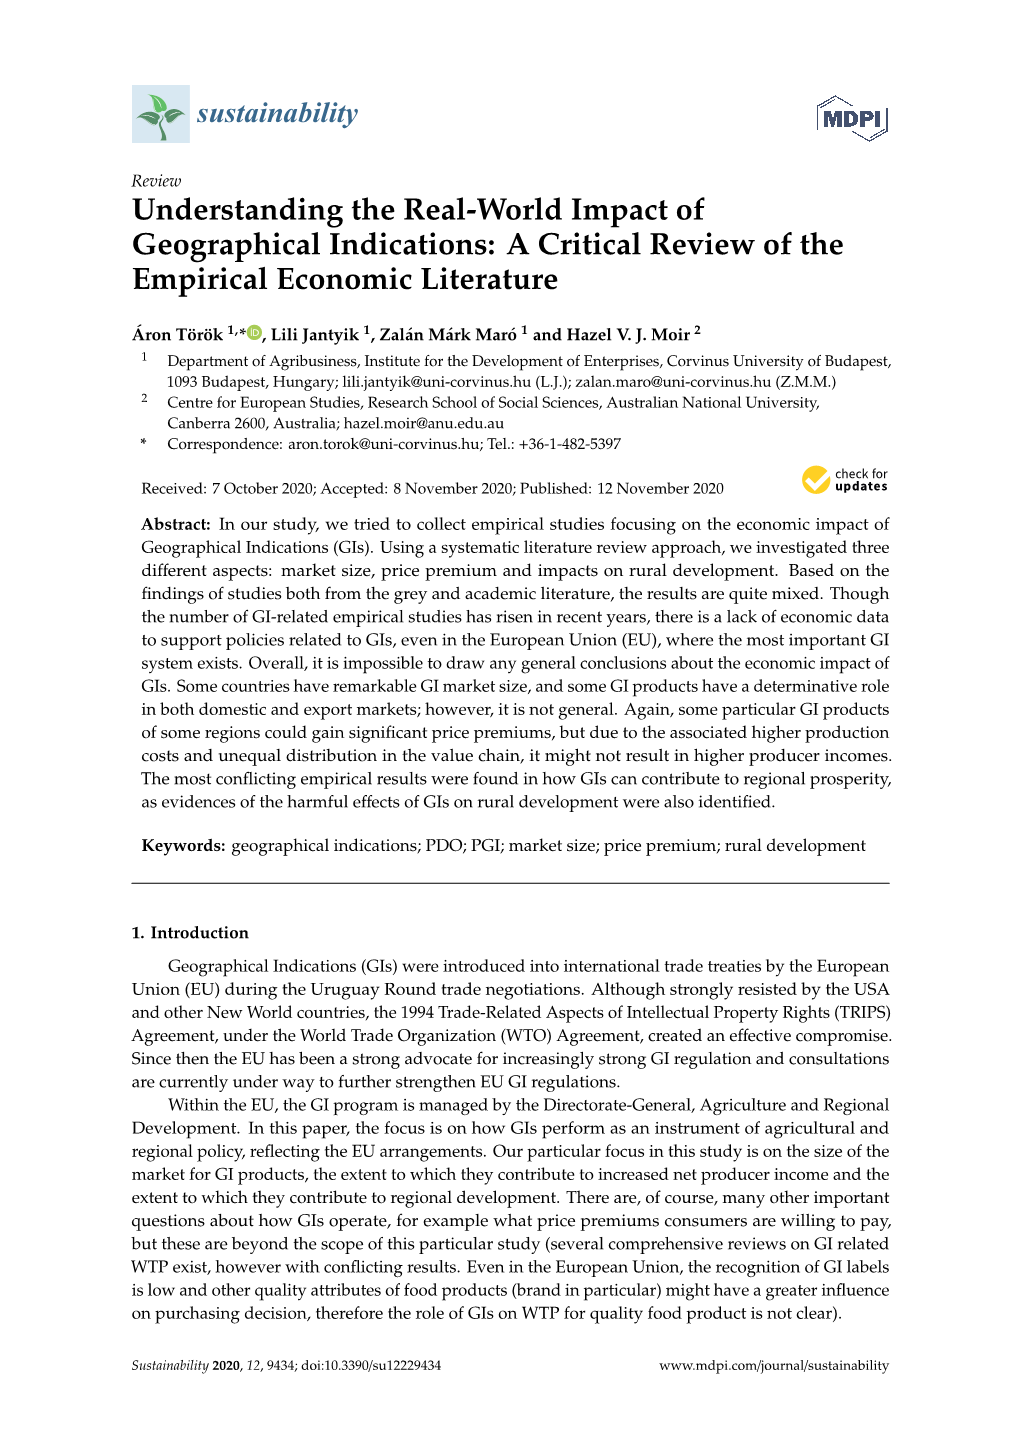 Understanding the Real-World Impact of Geographical Indications: a Critical Review of the Empirical Economic Literature